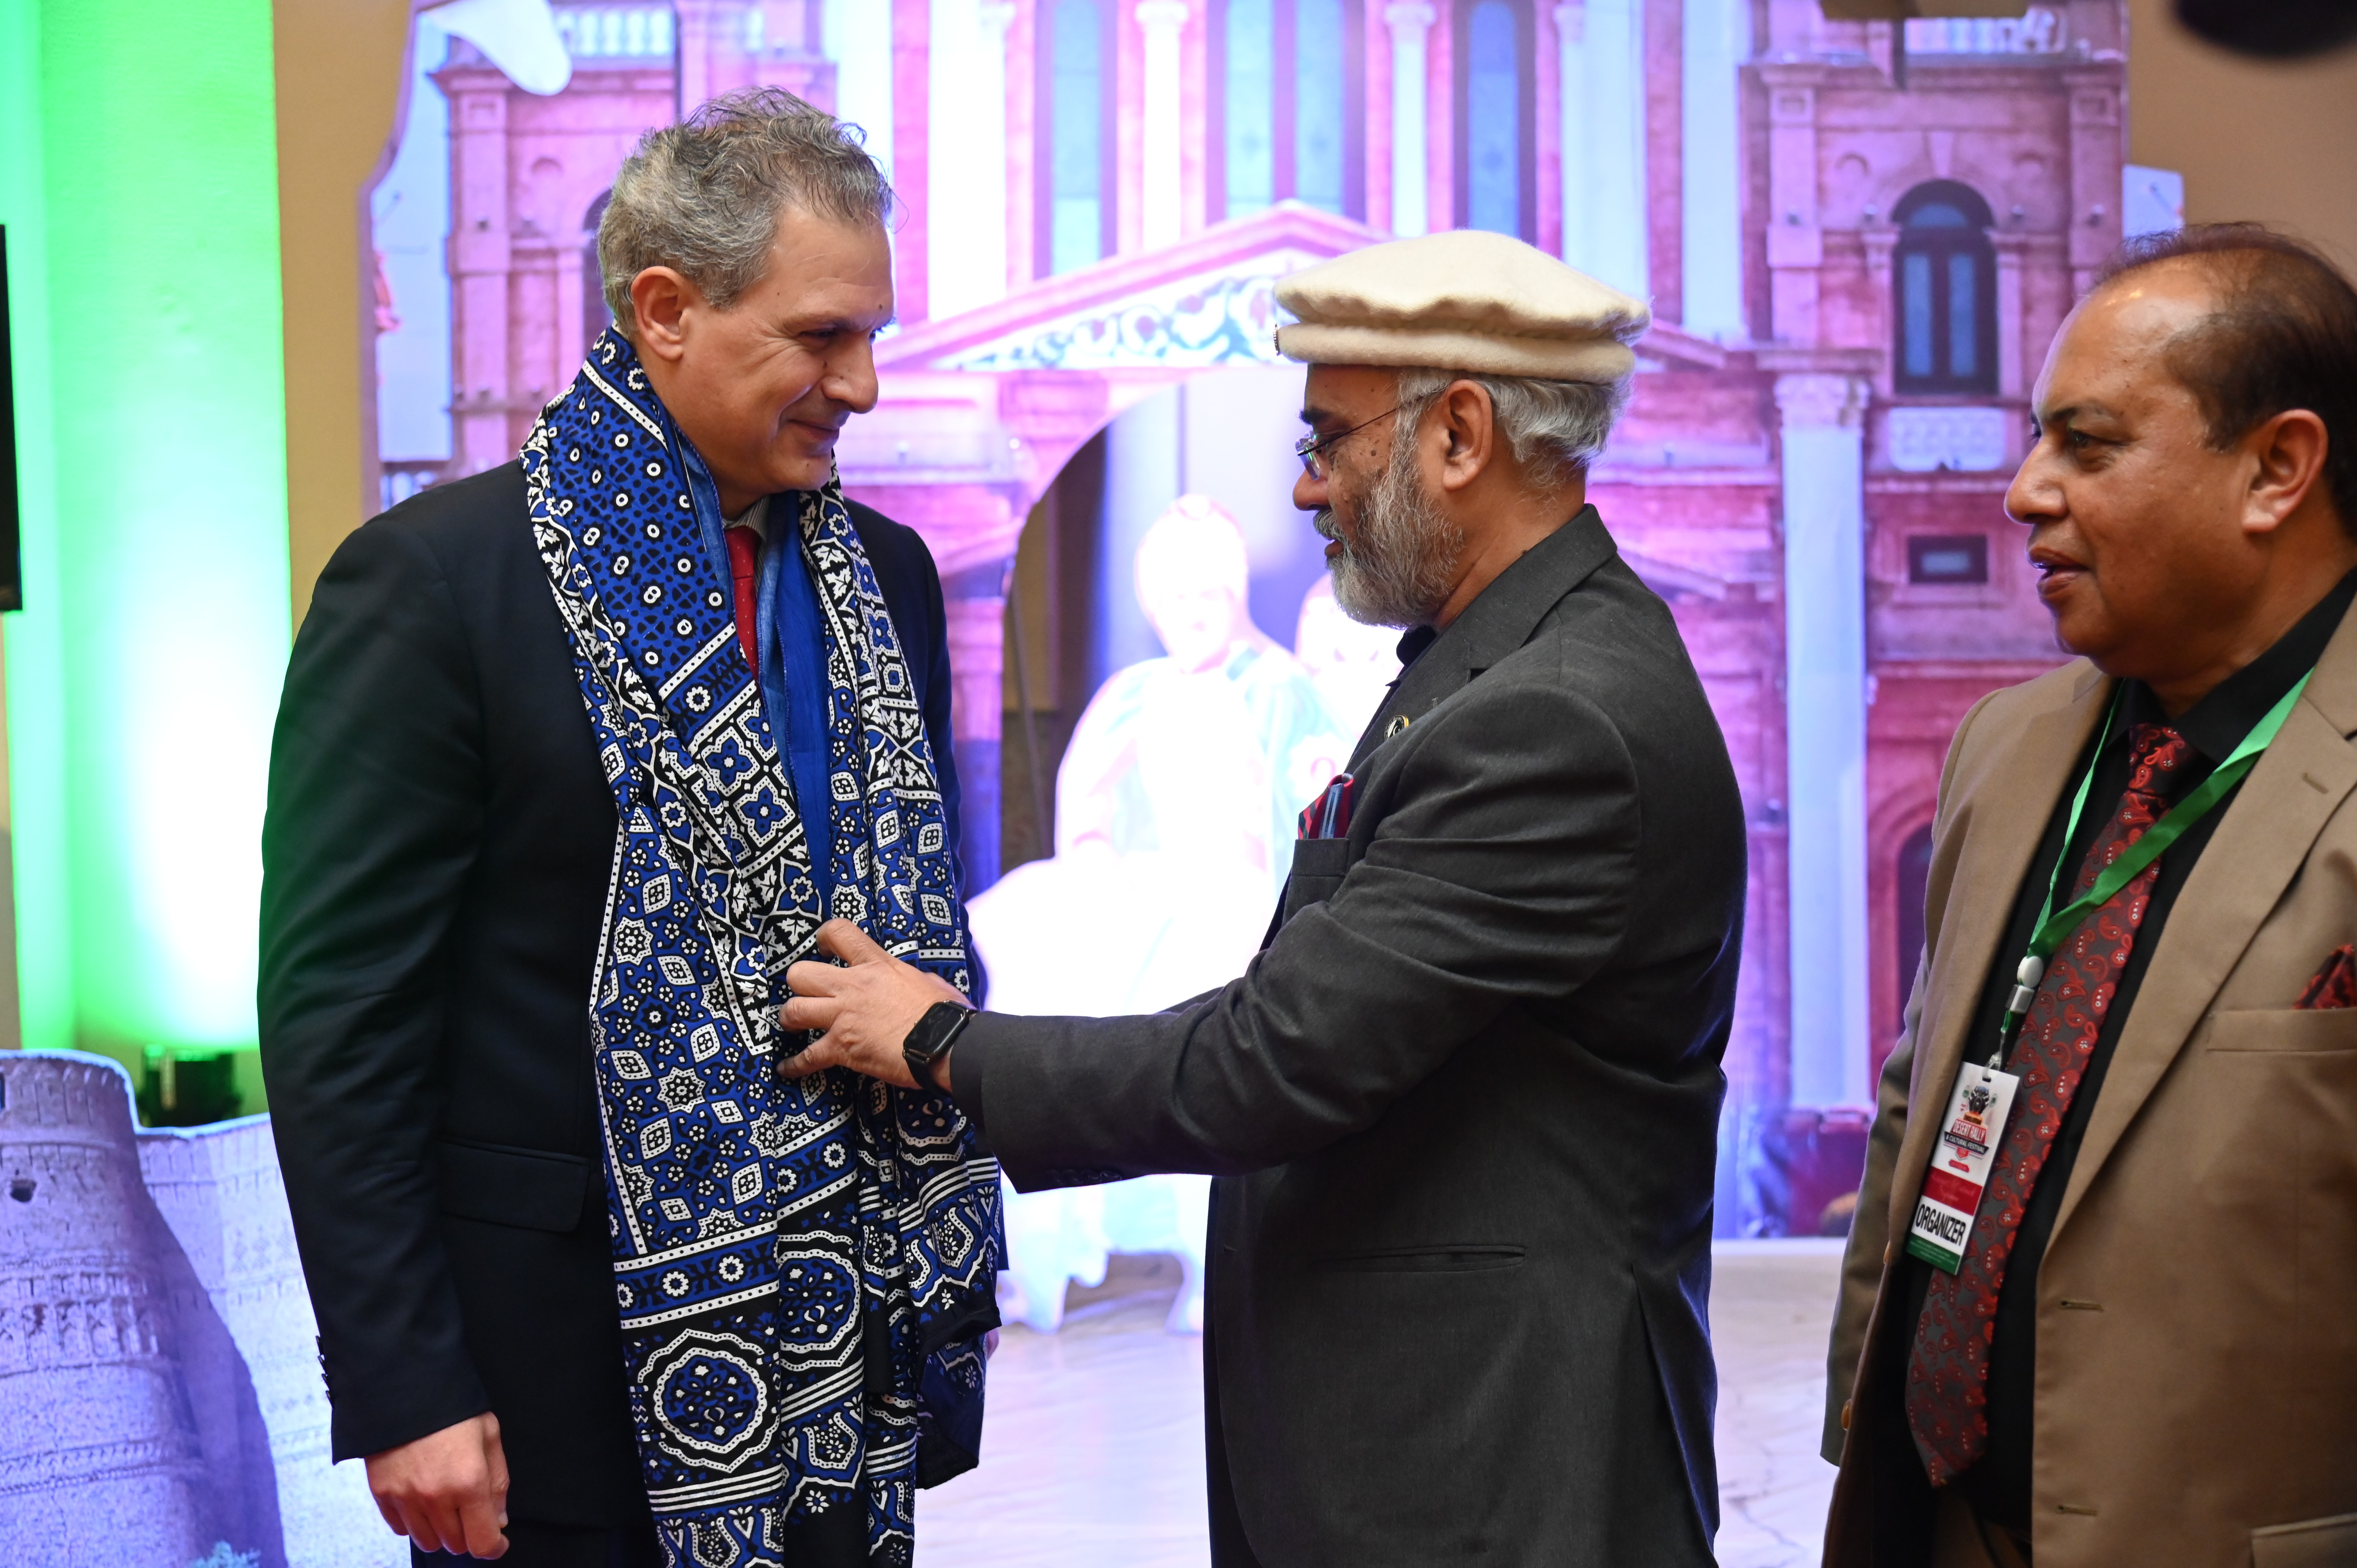 Aftab Ur Rehman giving an Ajrak to the chief guest as a good will gesture